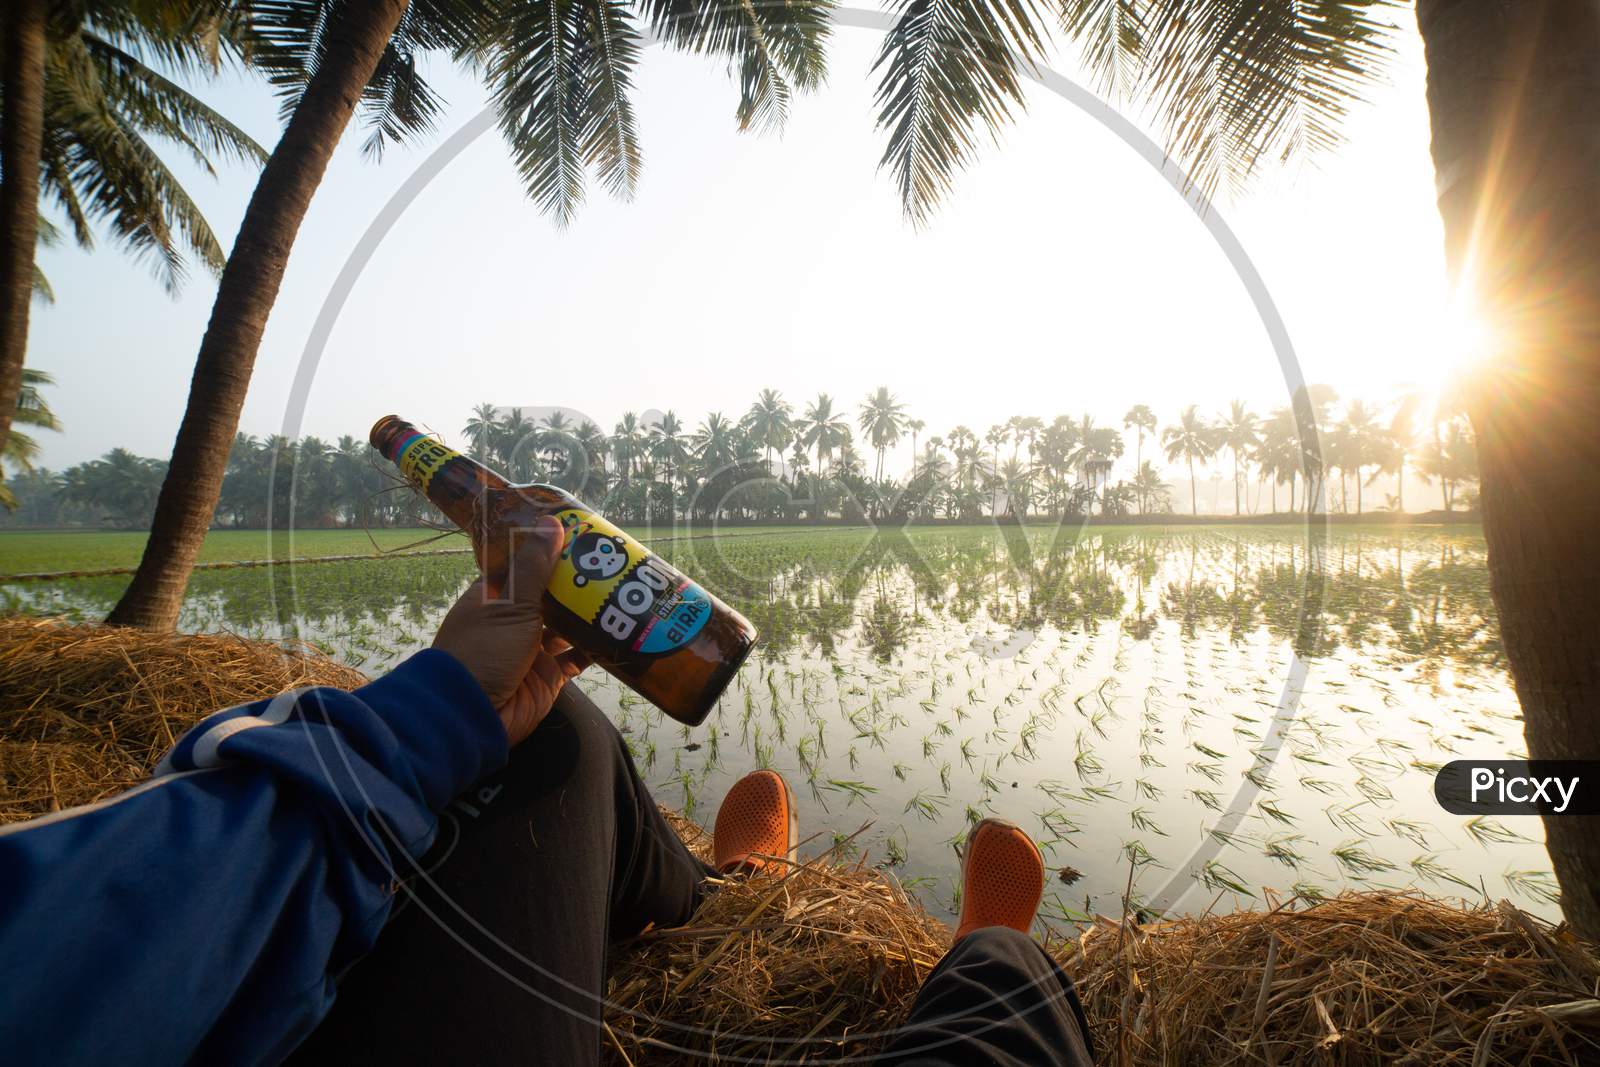 Man Holding a Beer Bottle With Paddy Fields in Background